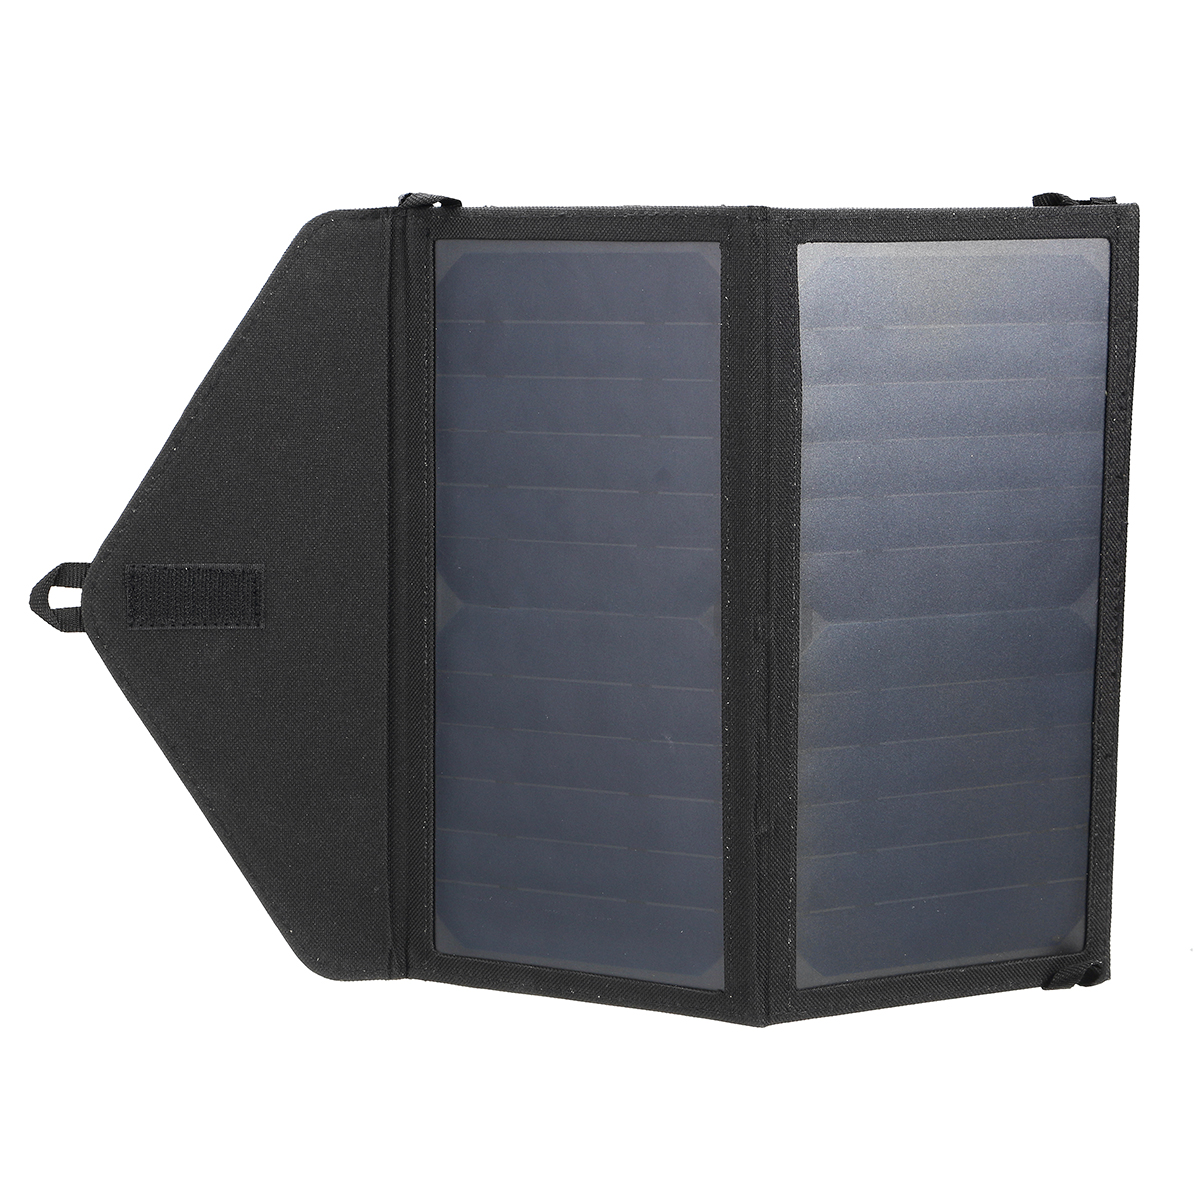 20W-Foldable-Solar-Panel-Portable-5V-2A-USB-Battery-Charger-Power-Bank-Fpr-Camping-Hiking-Traveling-1476063-9